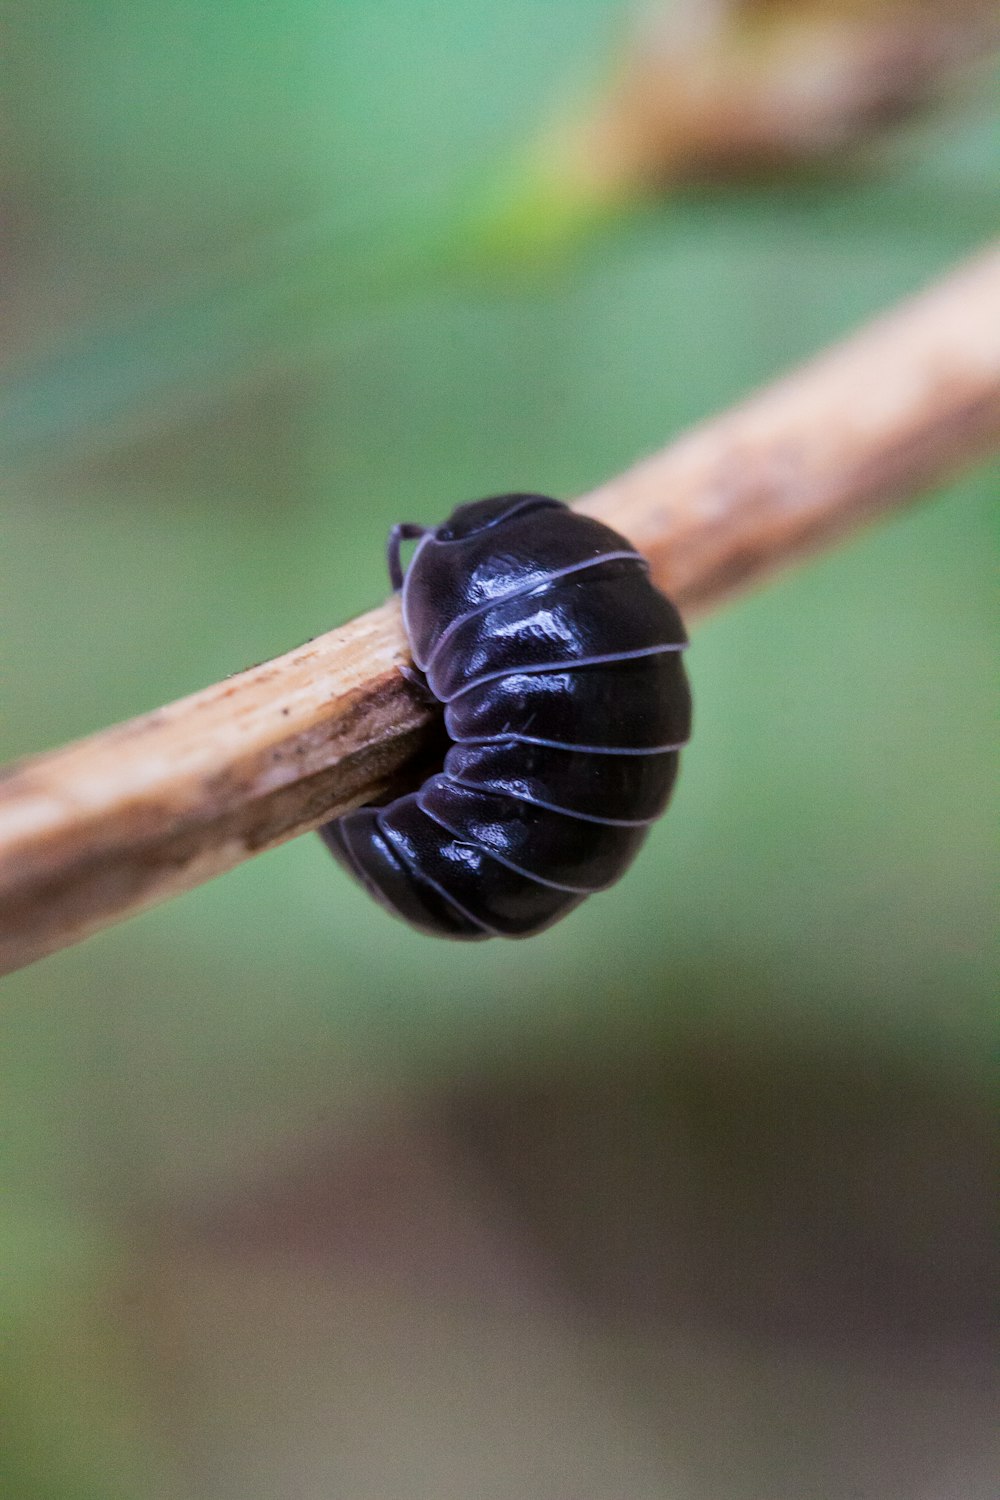 a black bug crawling on a wooden stick